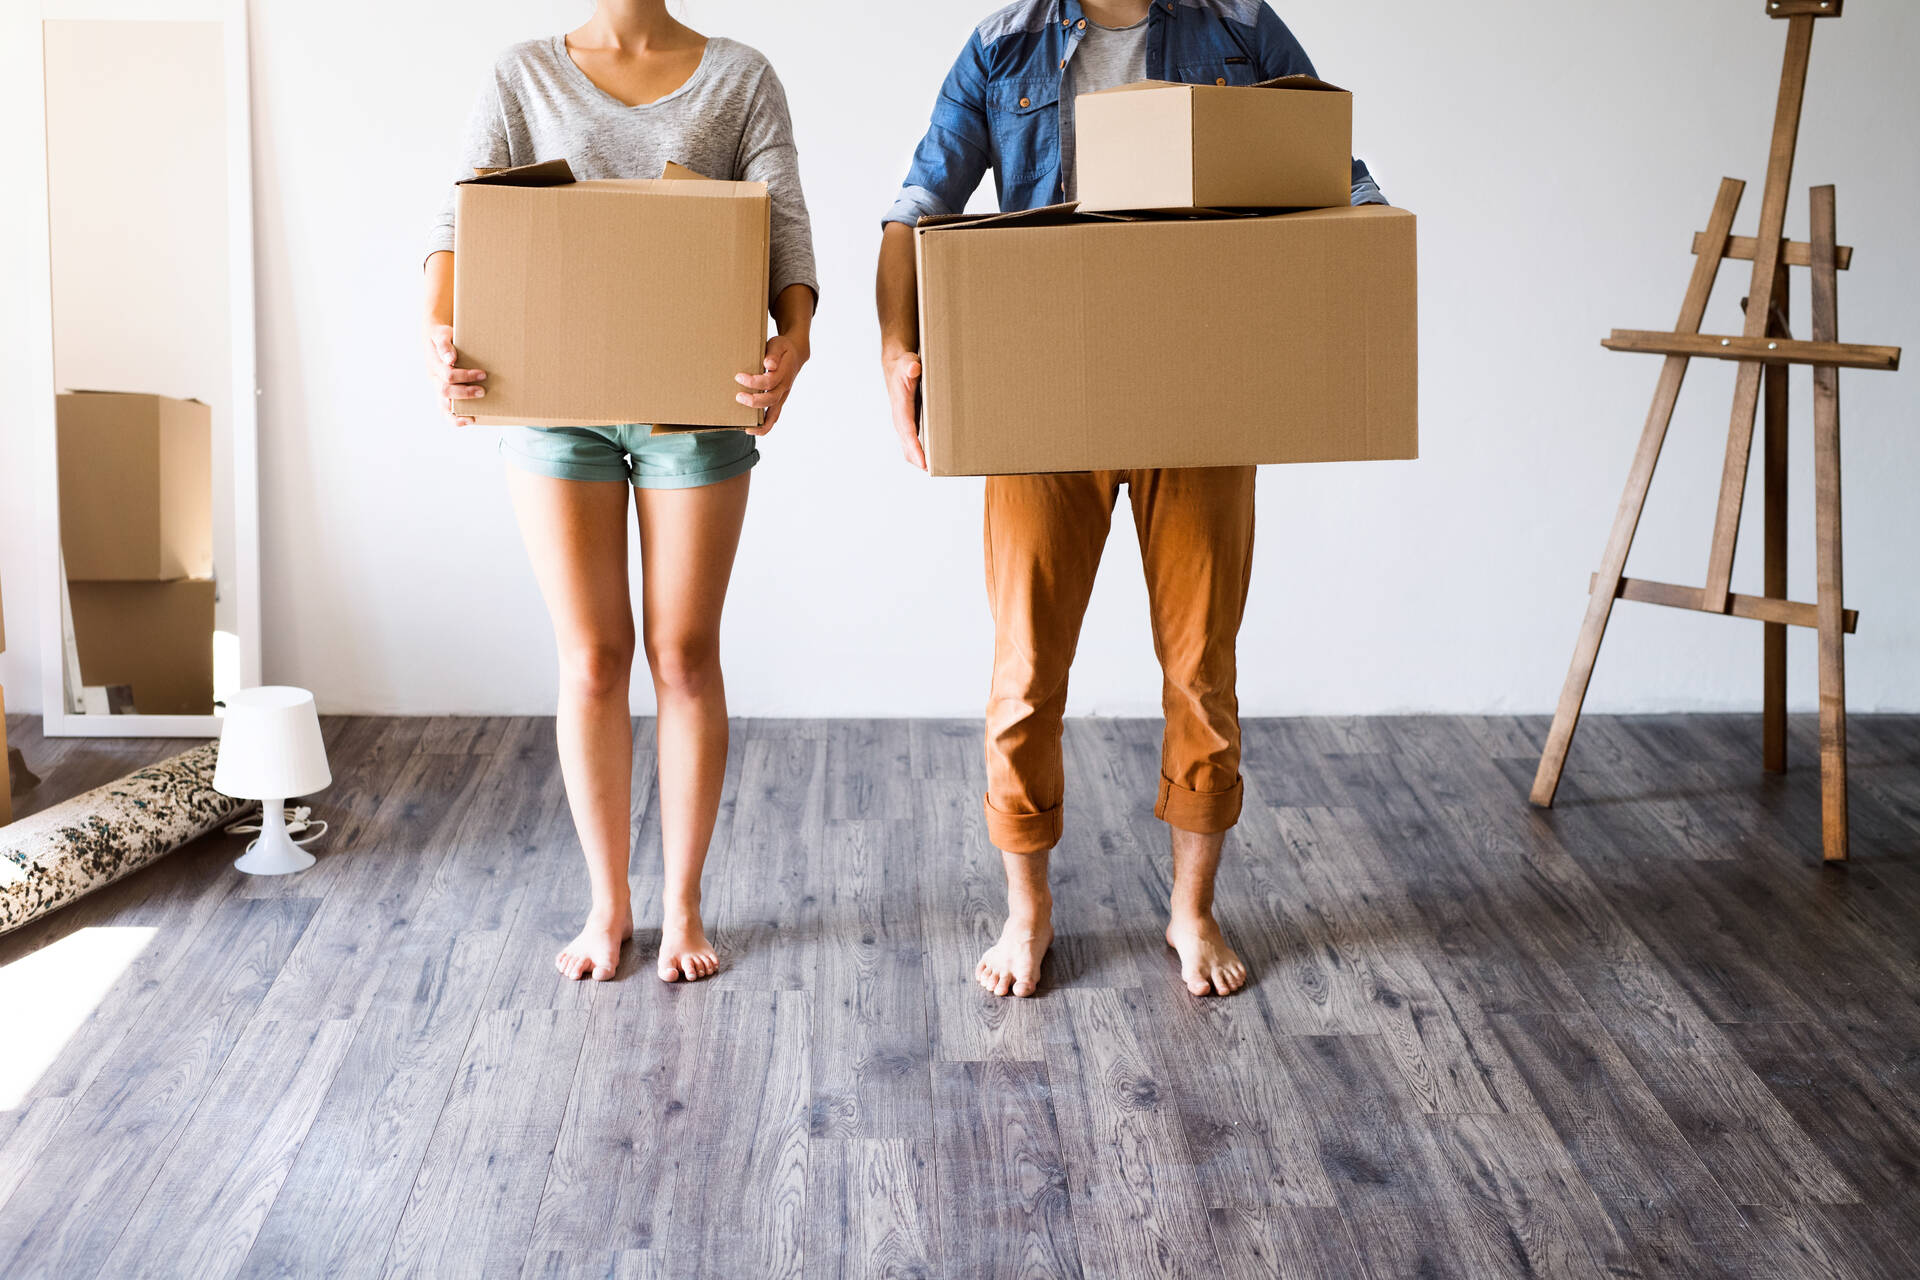 Two people holding boxes